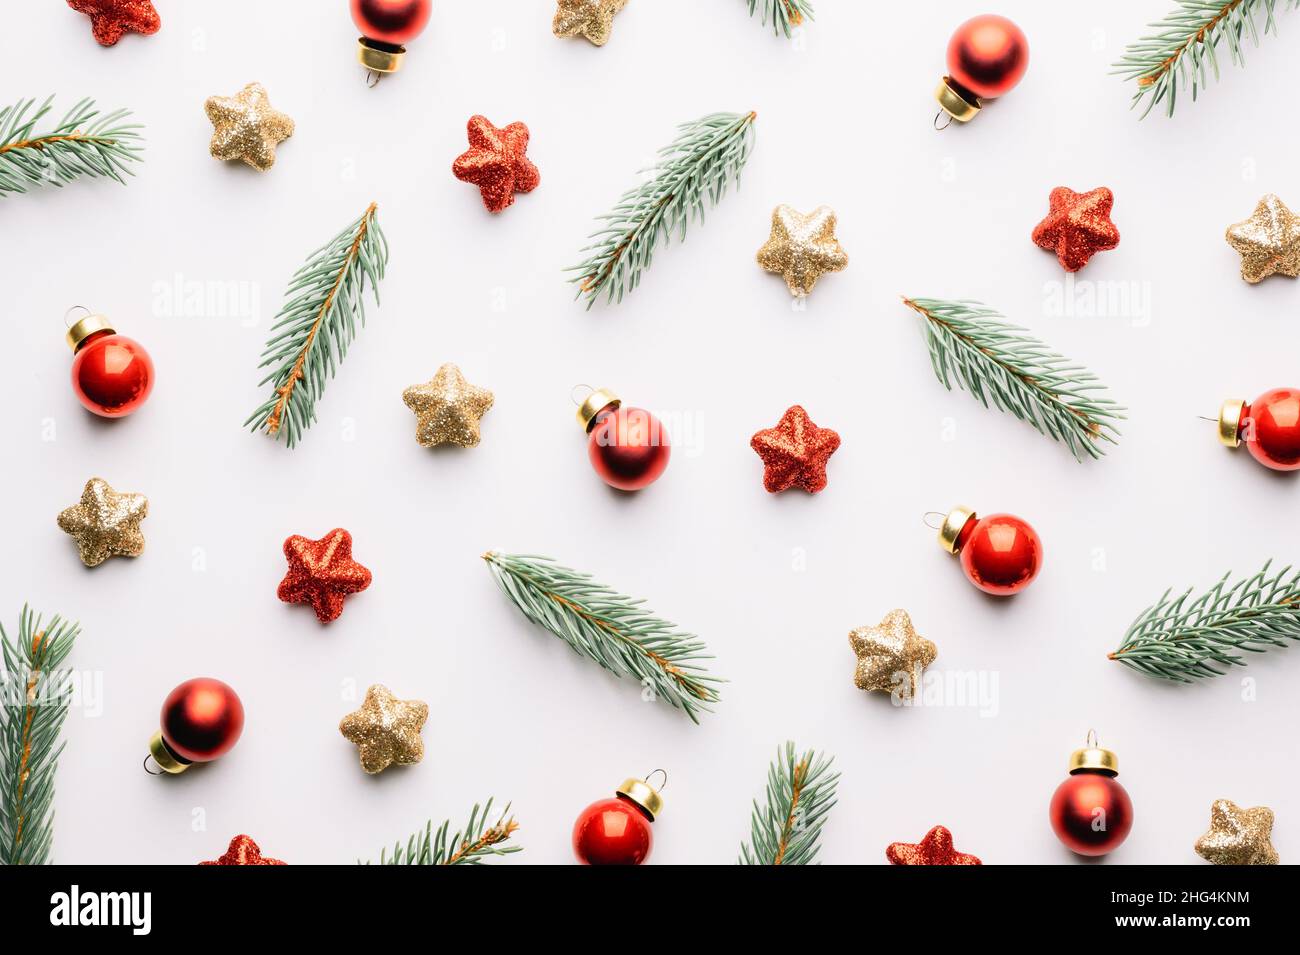 Creative Christmas background with Christmas balls, pine twigs, red and golden stars decorations on white background. Flat lay, top view, copy space Stock Photo